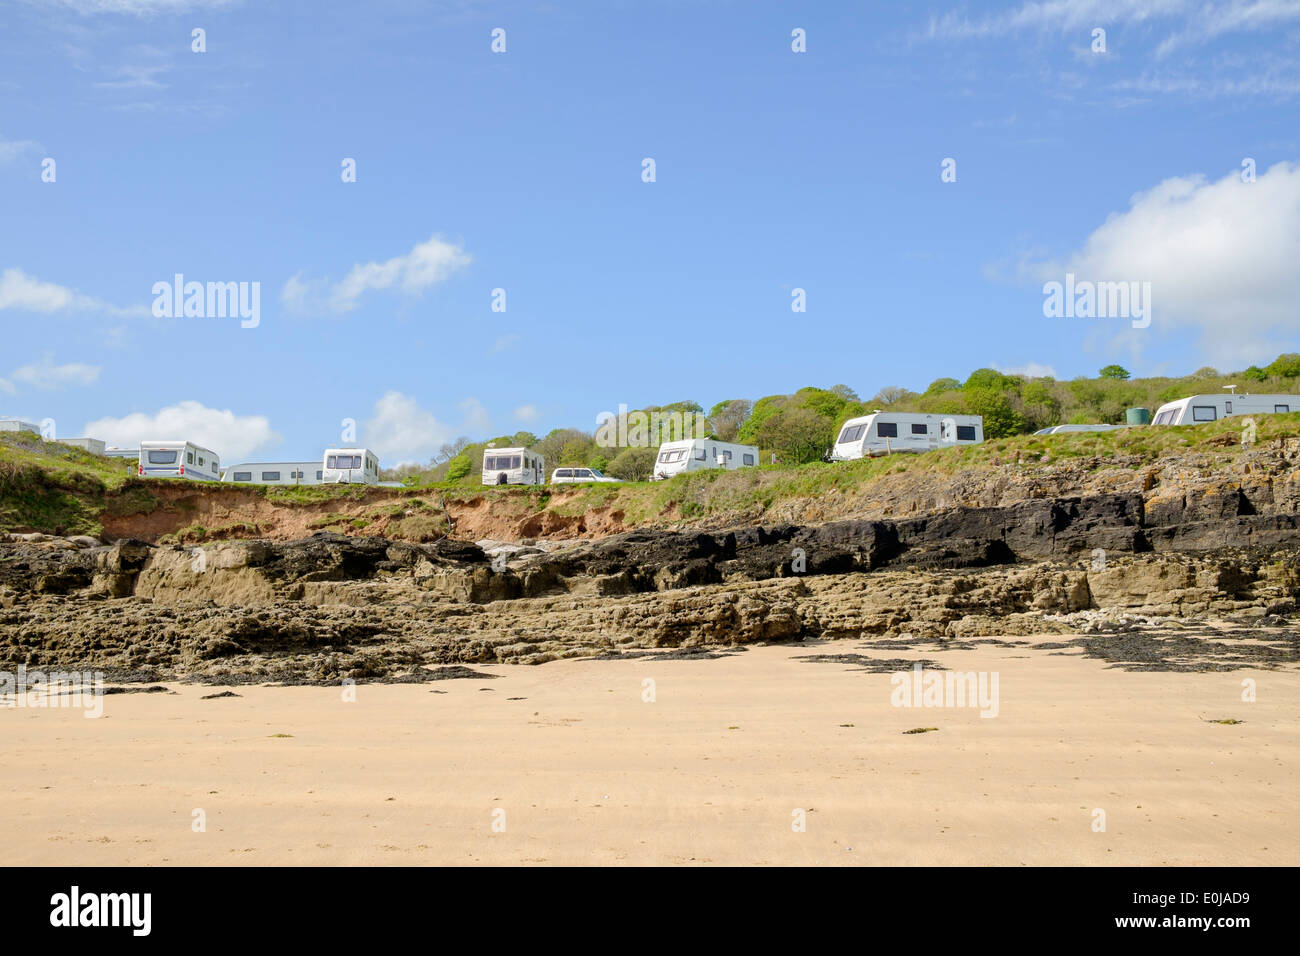 Caravan site overlooking a beach on the coast in Red Wharf Bay, Isle of Anglesey, North Wales, UK, Britain Stock Photo